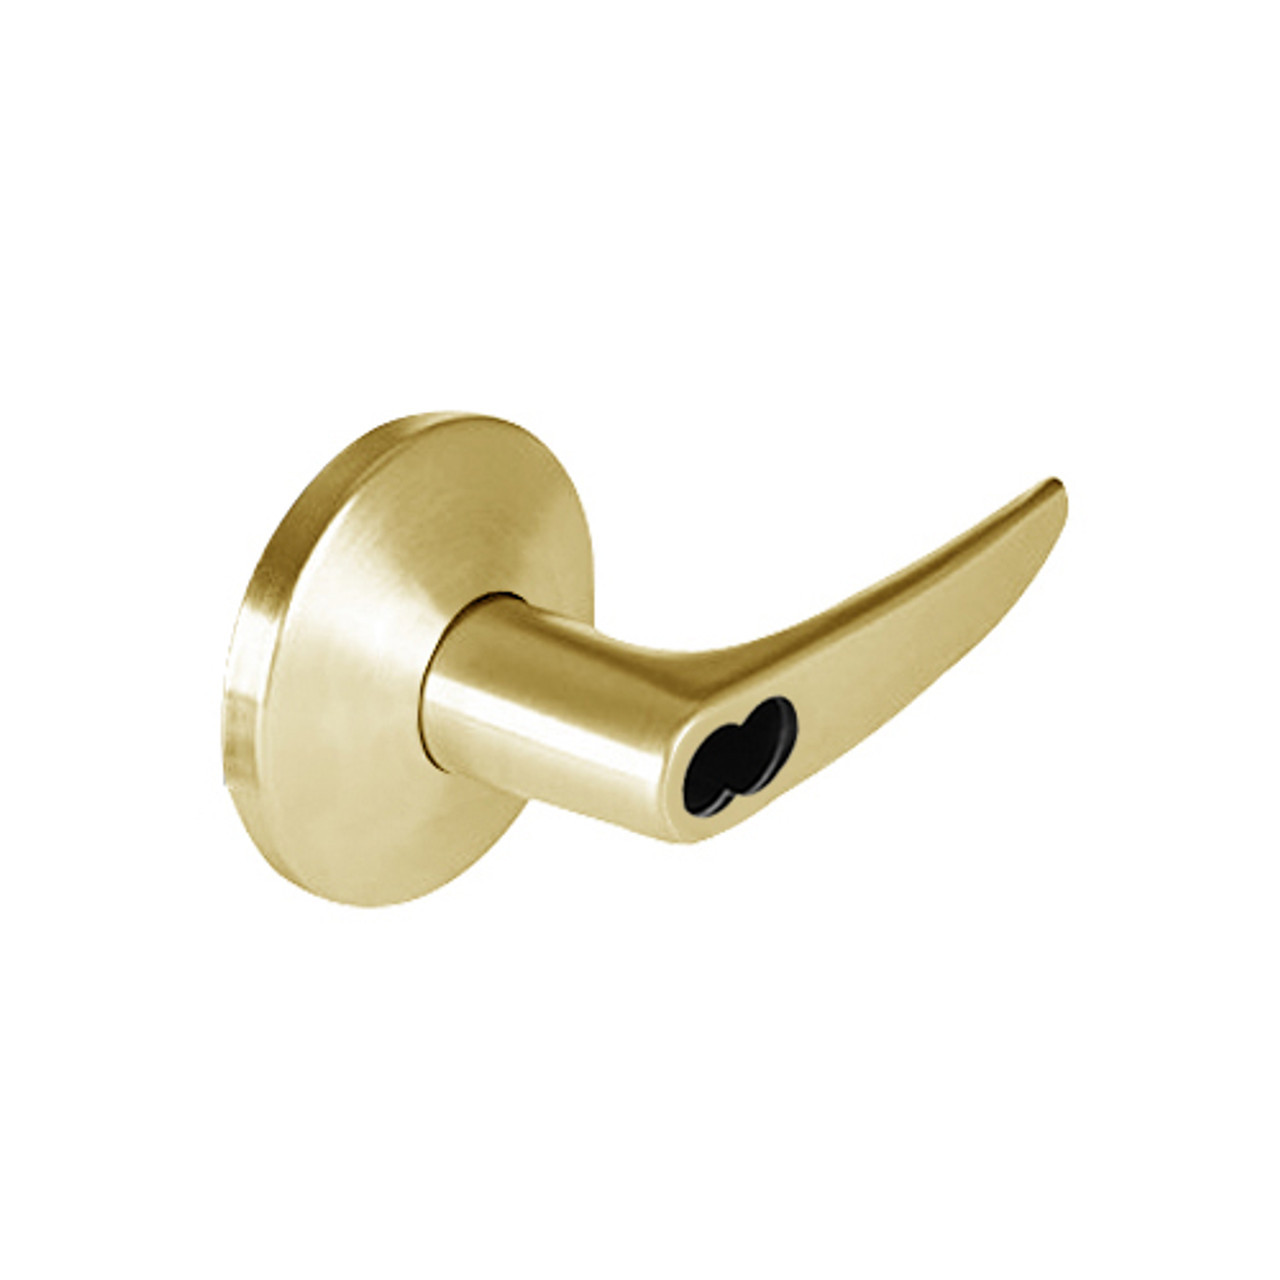 9K57A16LS3605LM Best 9K Series Dormitory or Storeroom Cylindrical Lever Locks with Curved without Return Lever Design Accept 7 Pin Best Core in Bright Brass